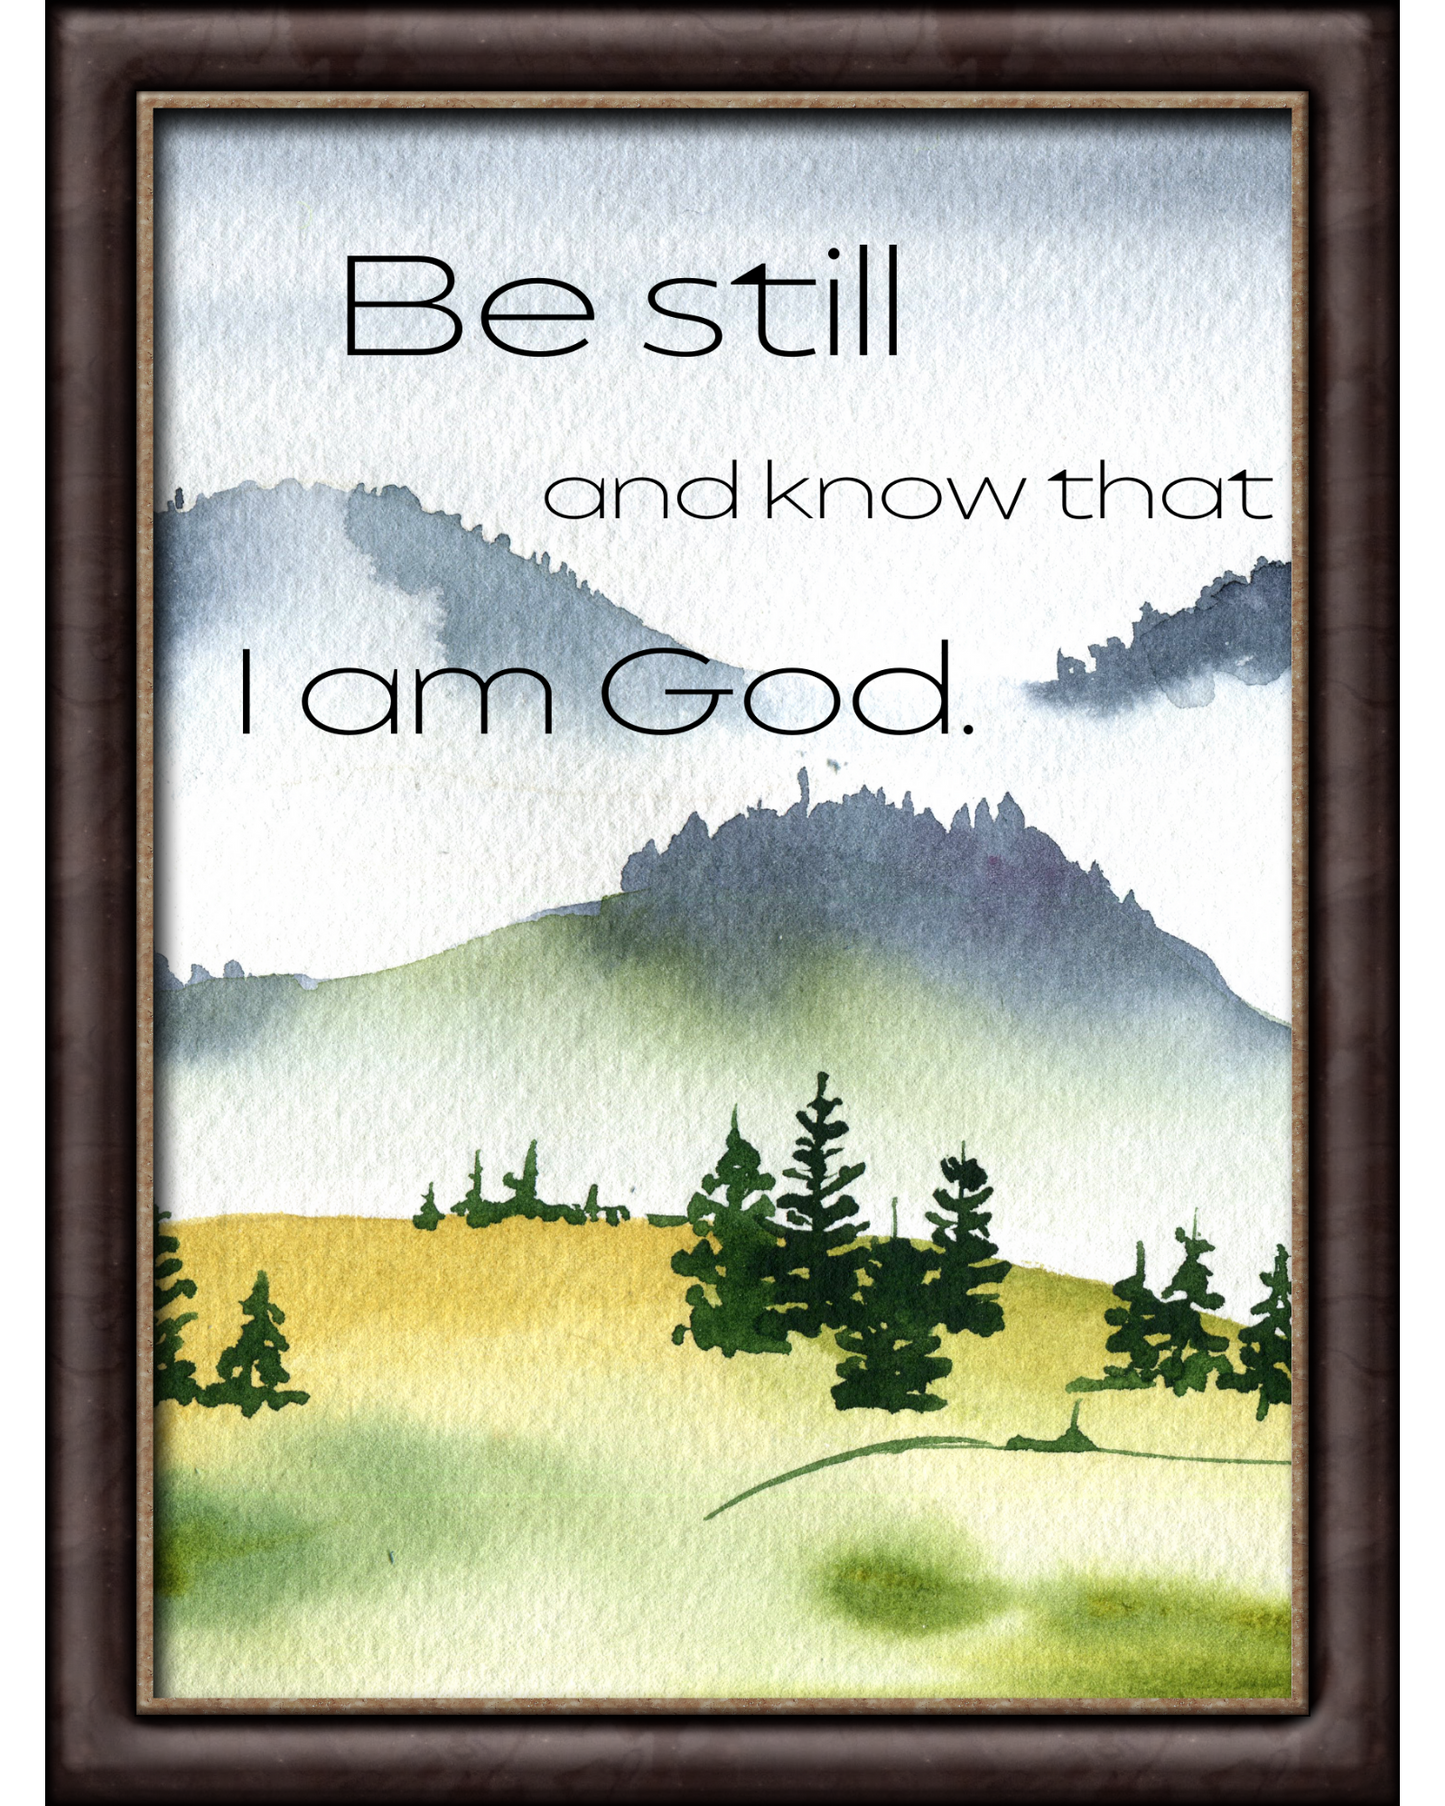 Be Still and Know that I am God Bible Verse Forest Image - Physical Print Wall Art